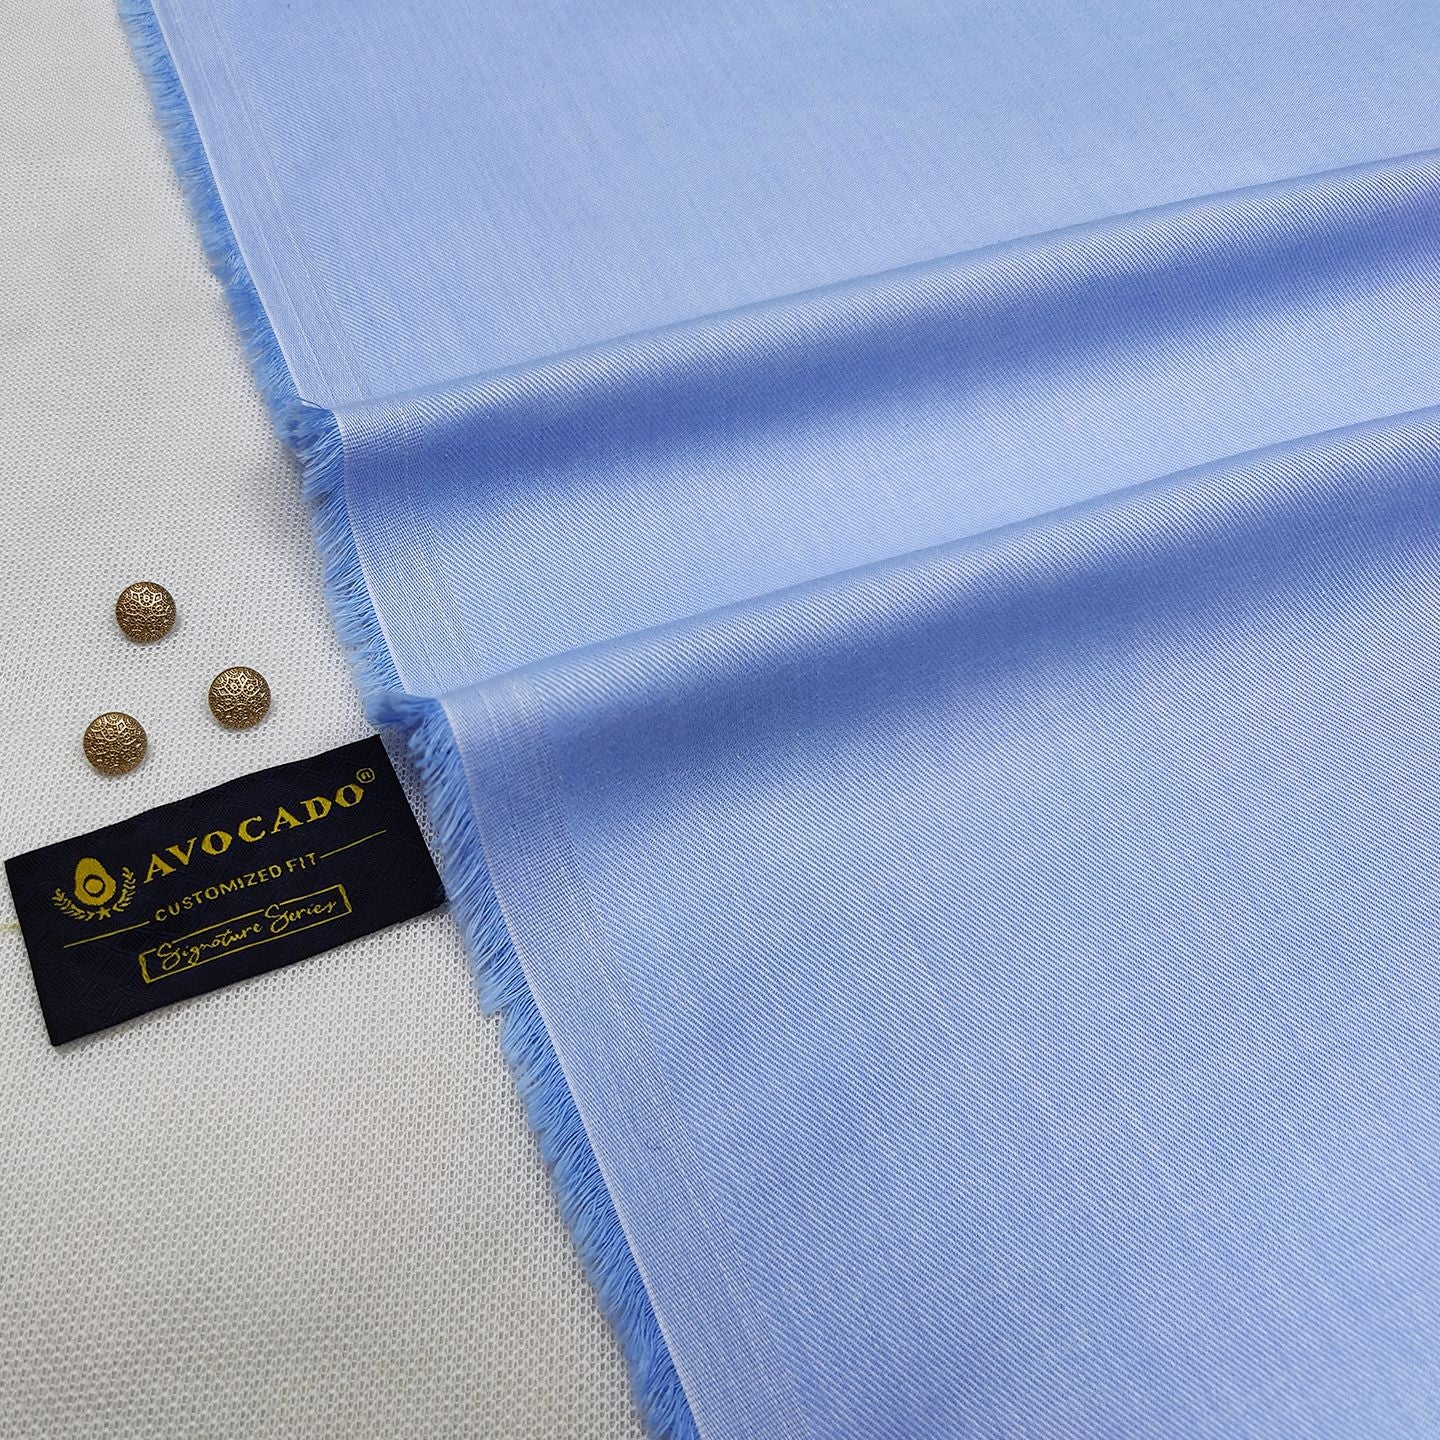 Sky Blue Cross Lining kameez shalwar Fabric with Buttons & label